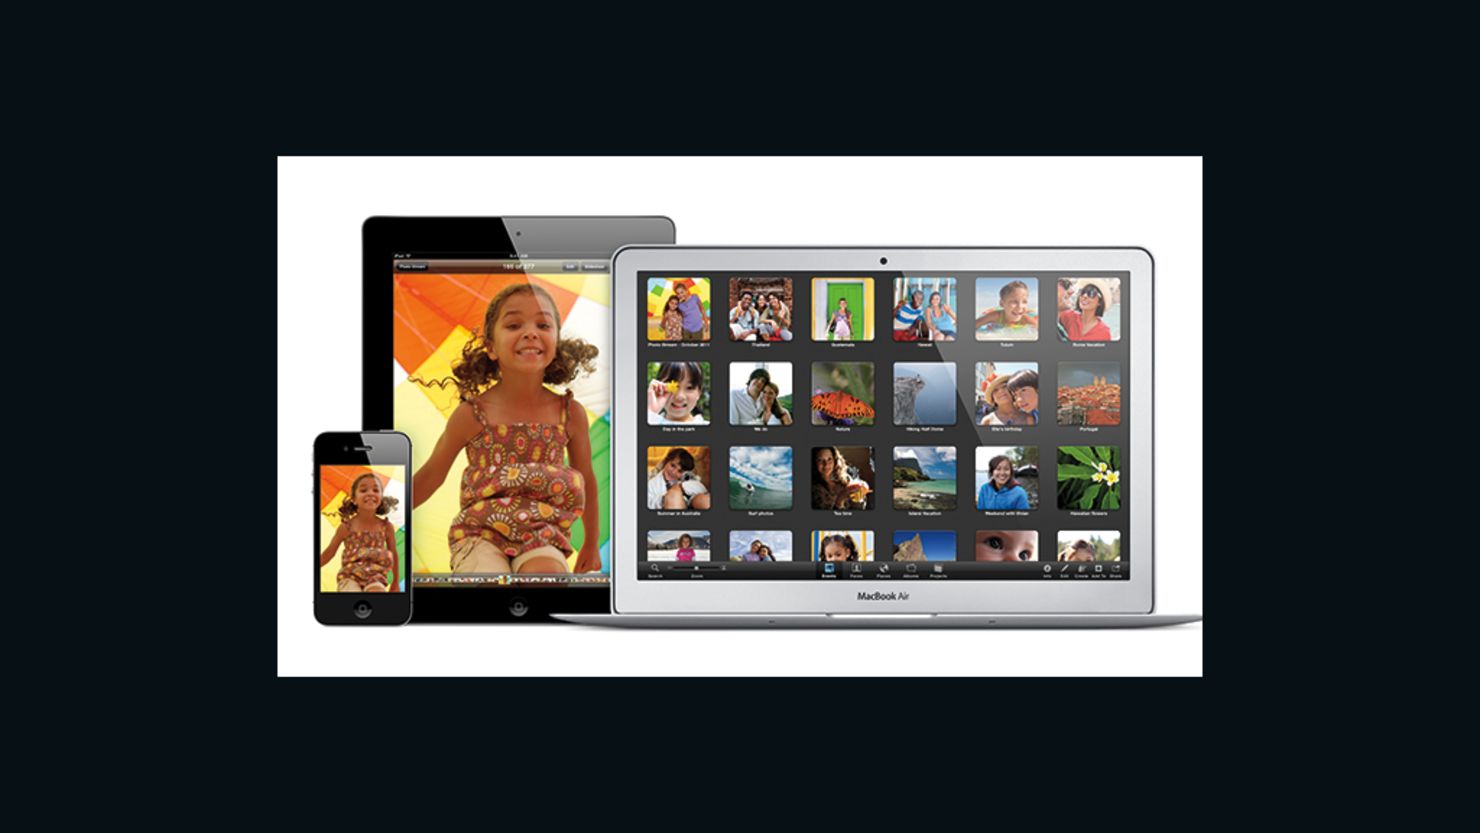 The iCloud service allows Apple customers to link all their devices.